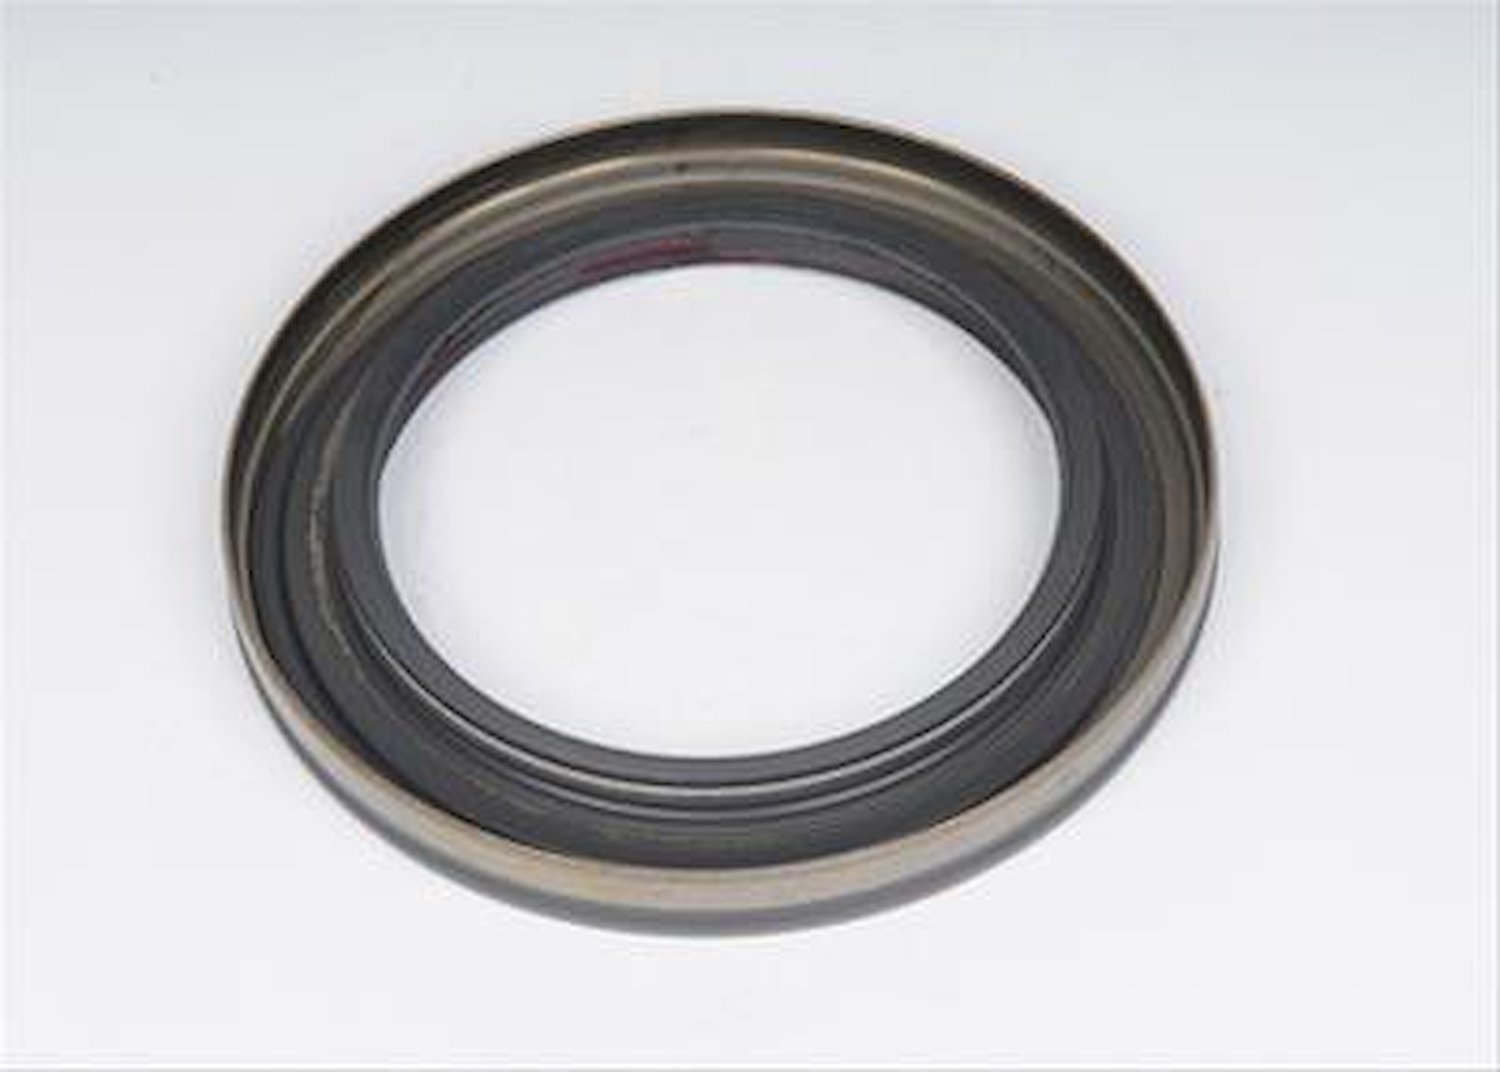 Automatic Transmission Torque Converter Seal for Select 2001-2019 Chevrolet, GMC Trucks